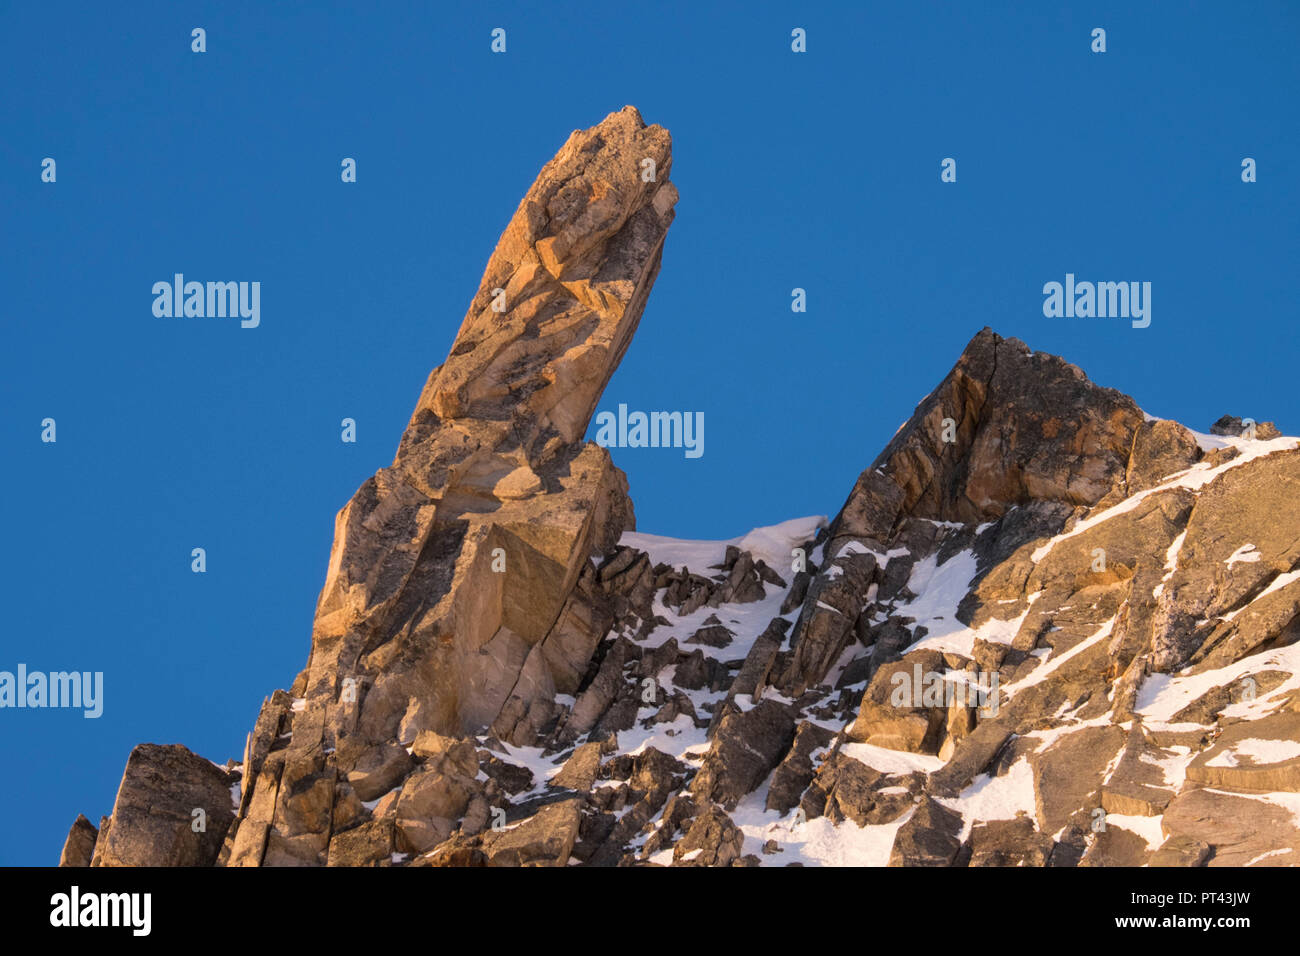 Rock formations at the Simonyspitze, Hohe Tauern, East Tyrol, Austria. Stock Photo